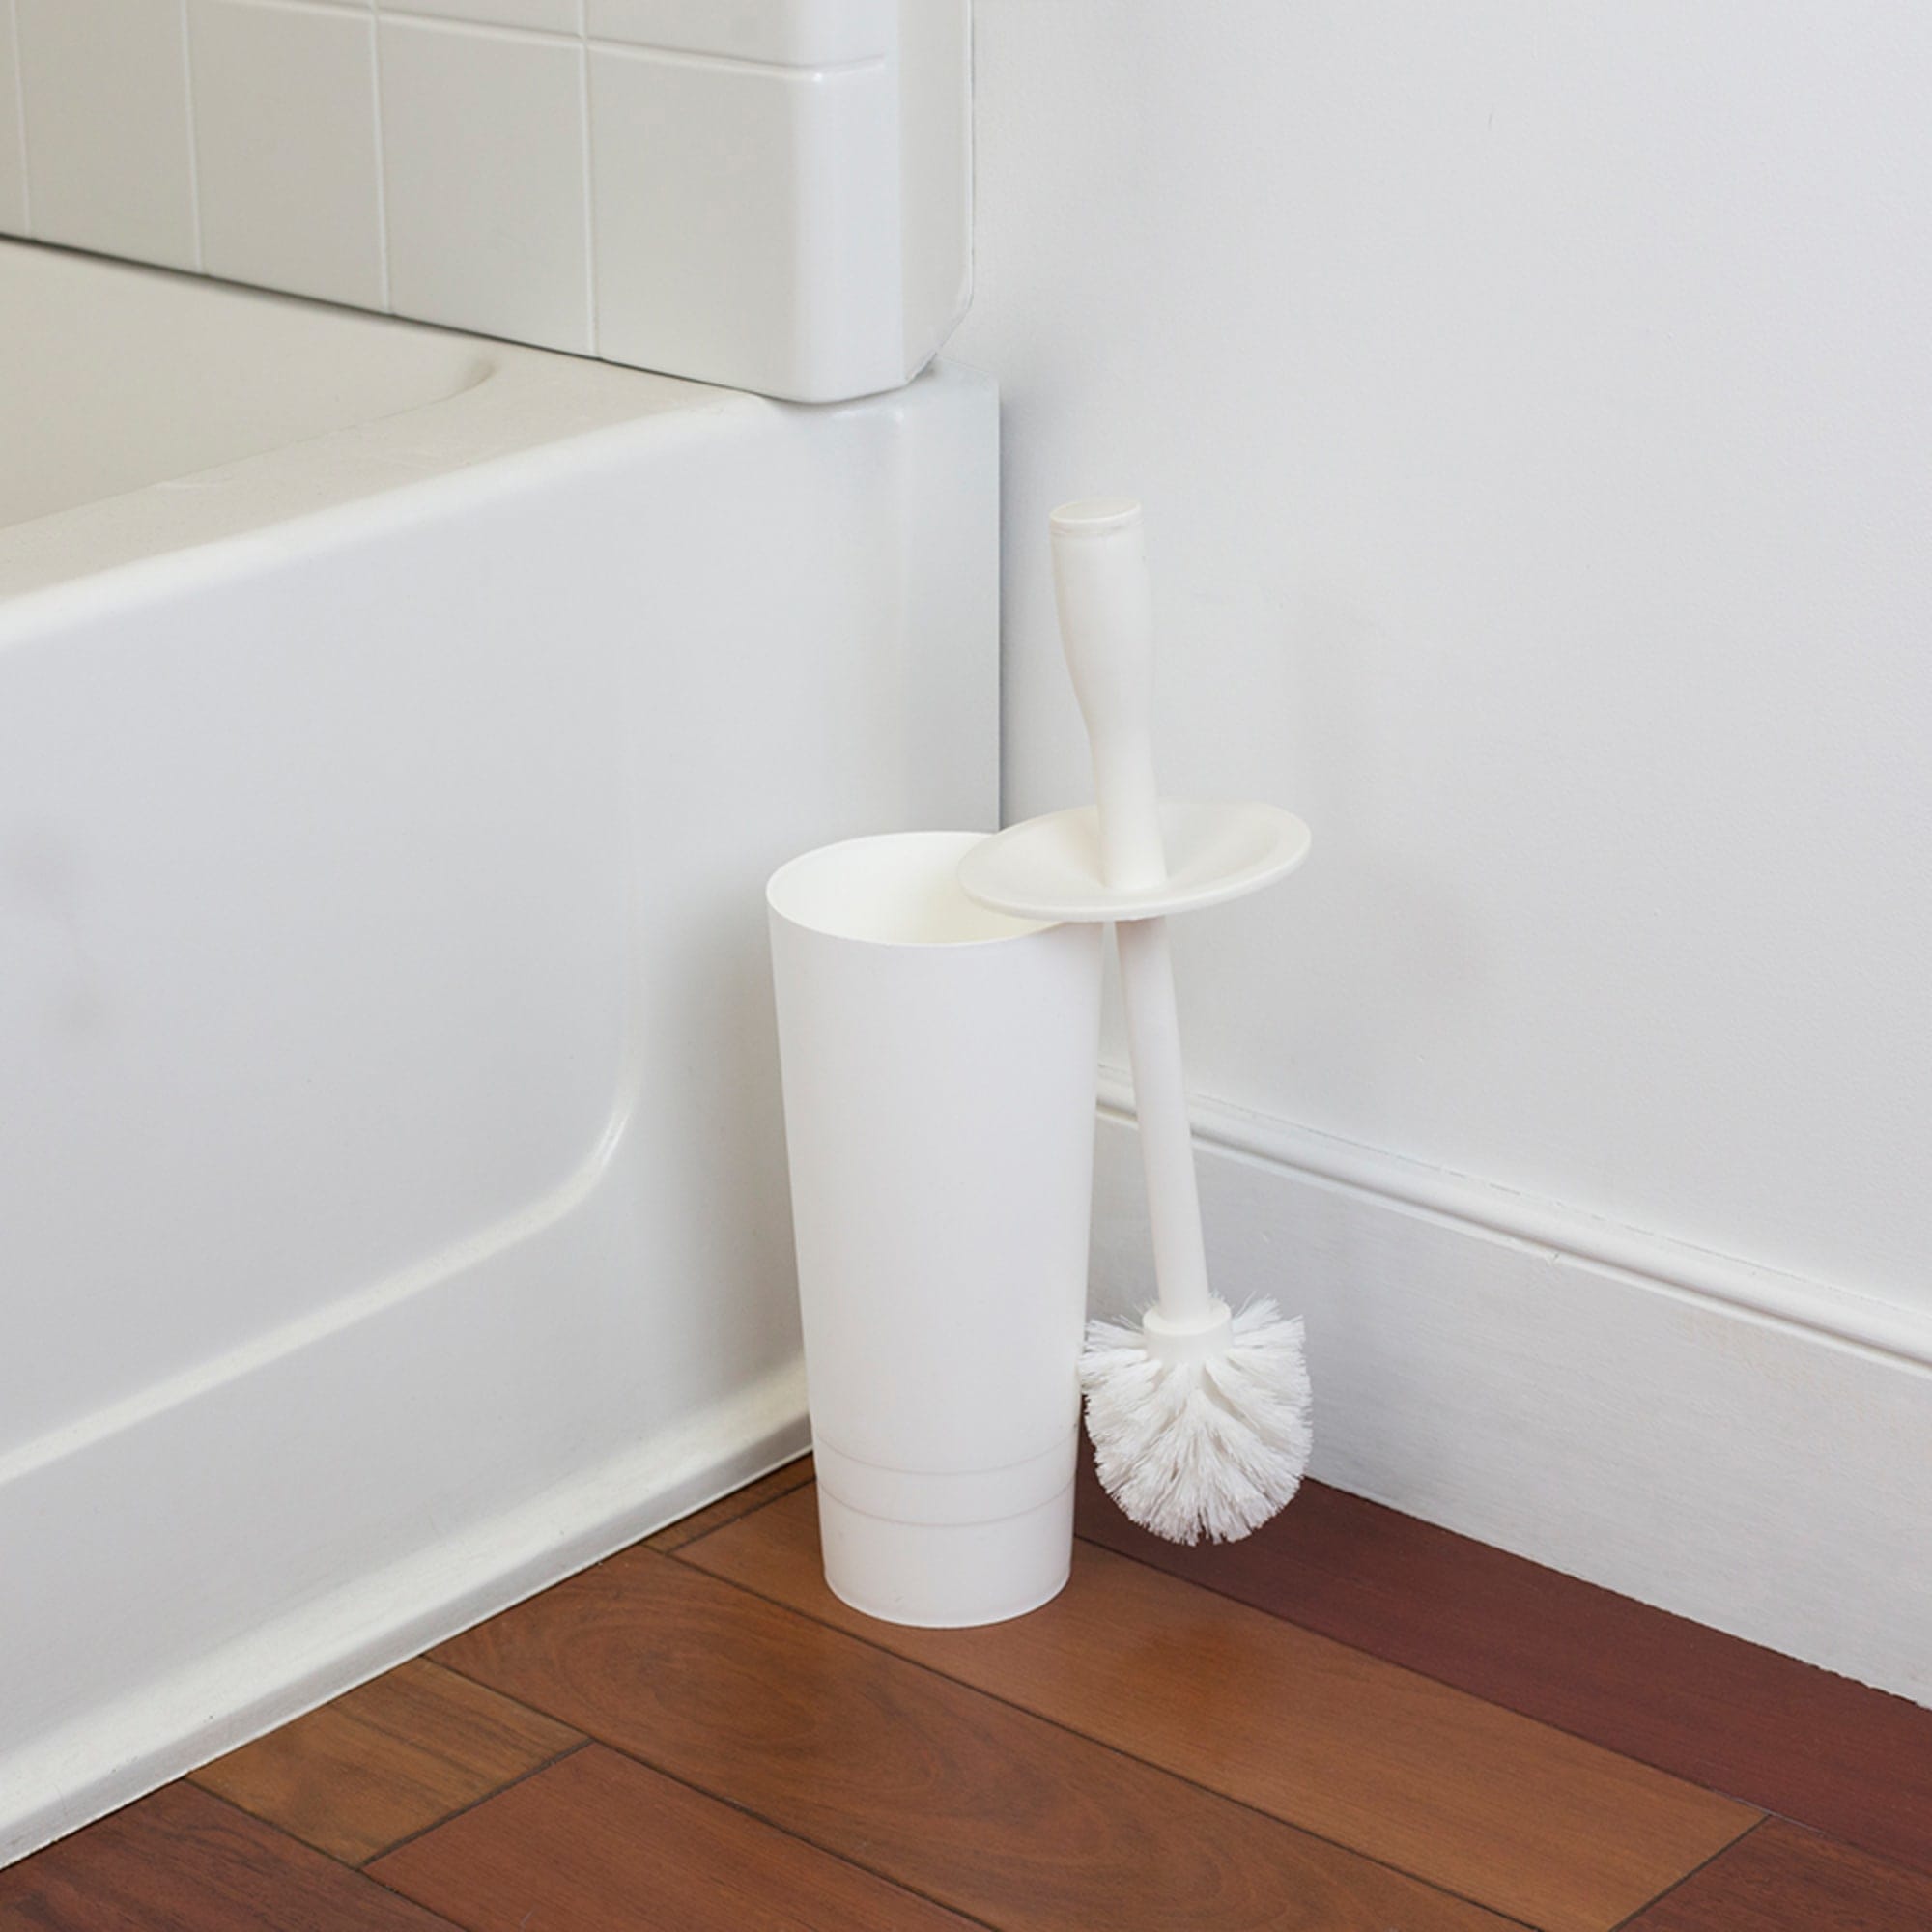 A Home Plastic Toilet Brush And Holder